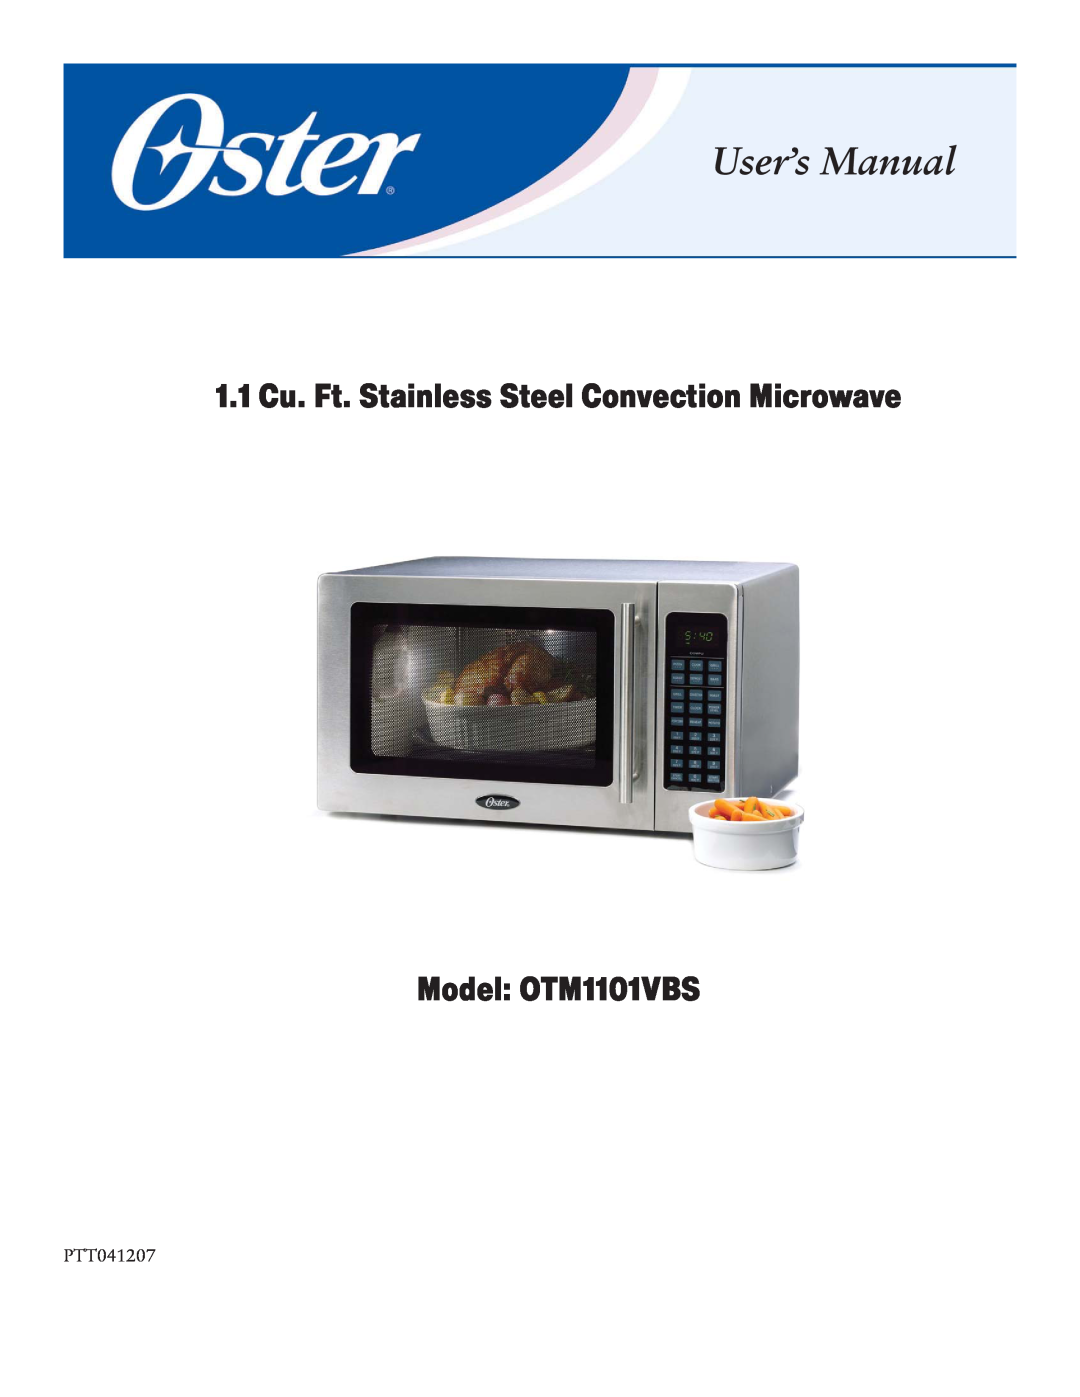 Oster user manual 1.1 Cu. Ft. Stainless Steel Convection Microwave, Model OTM1101VBS, PTT041207 